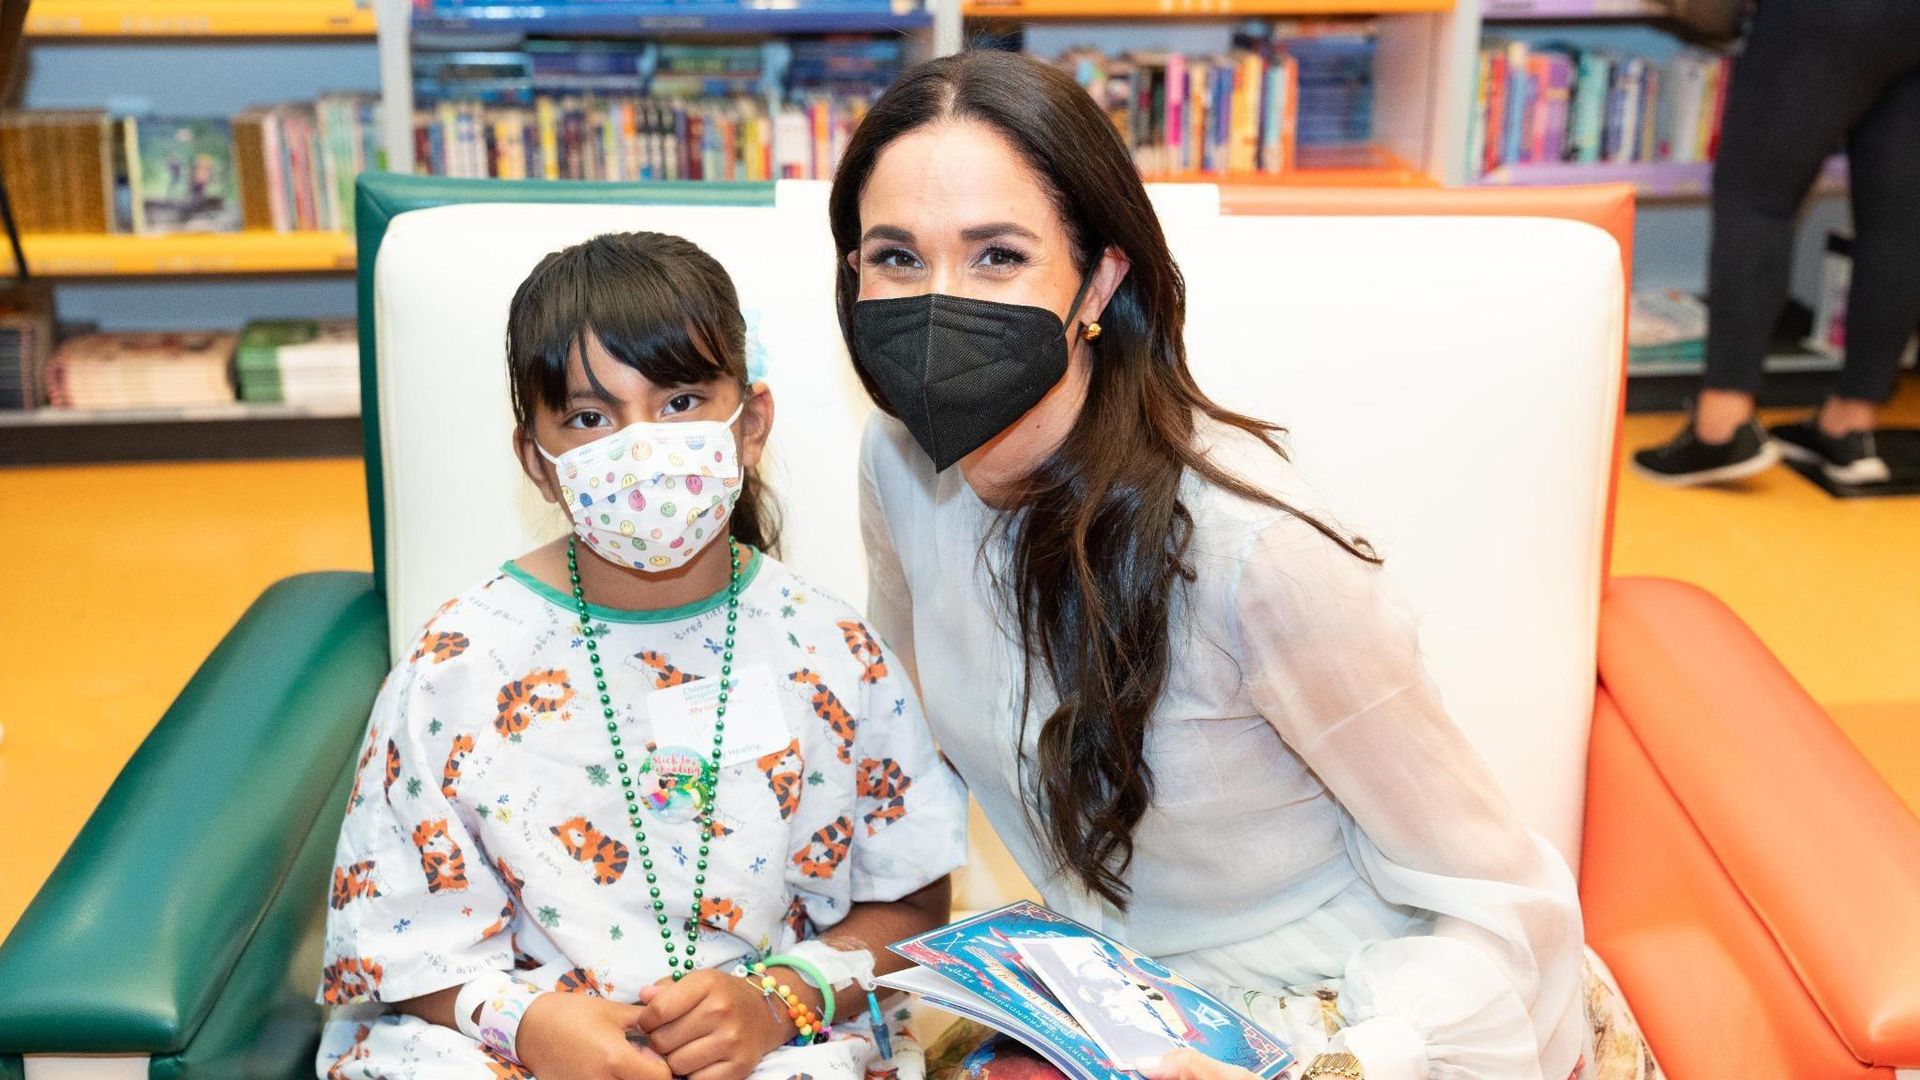 Meghan Markle posing for photograph with young patient